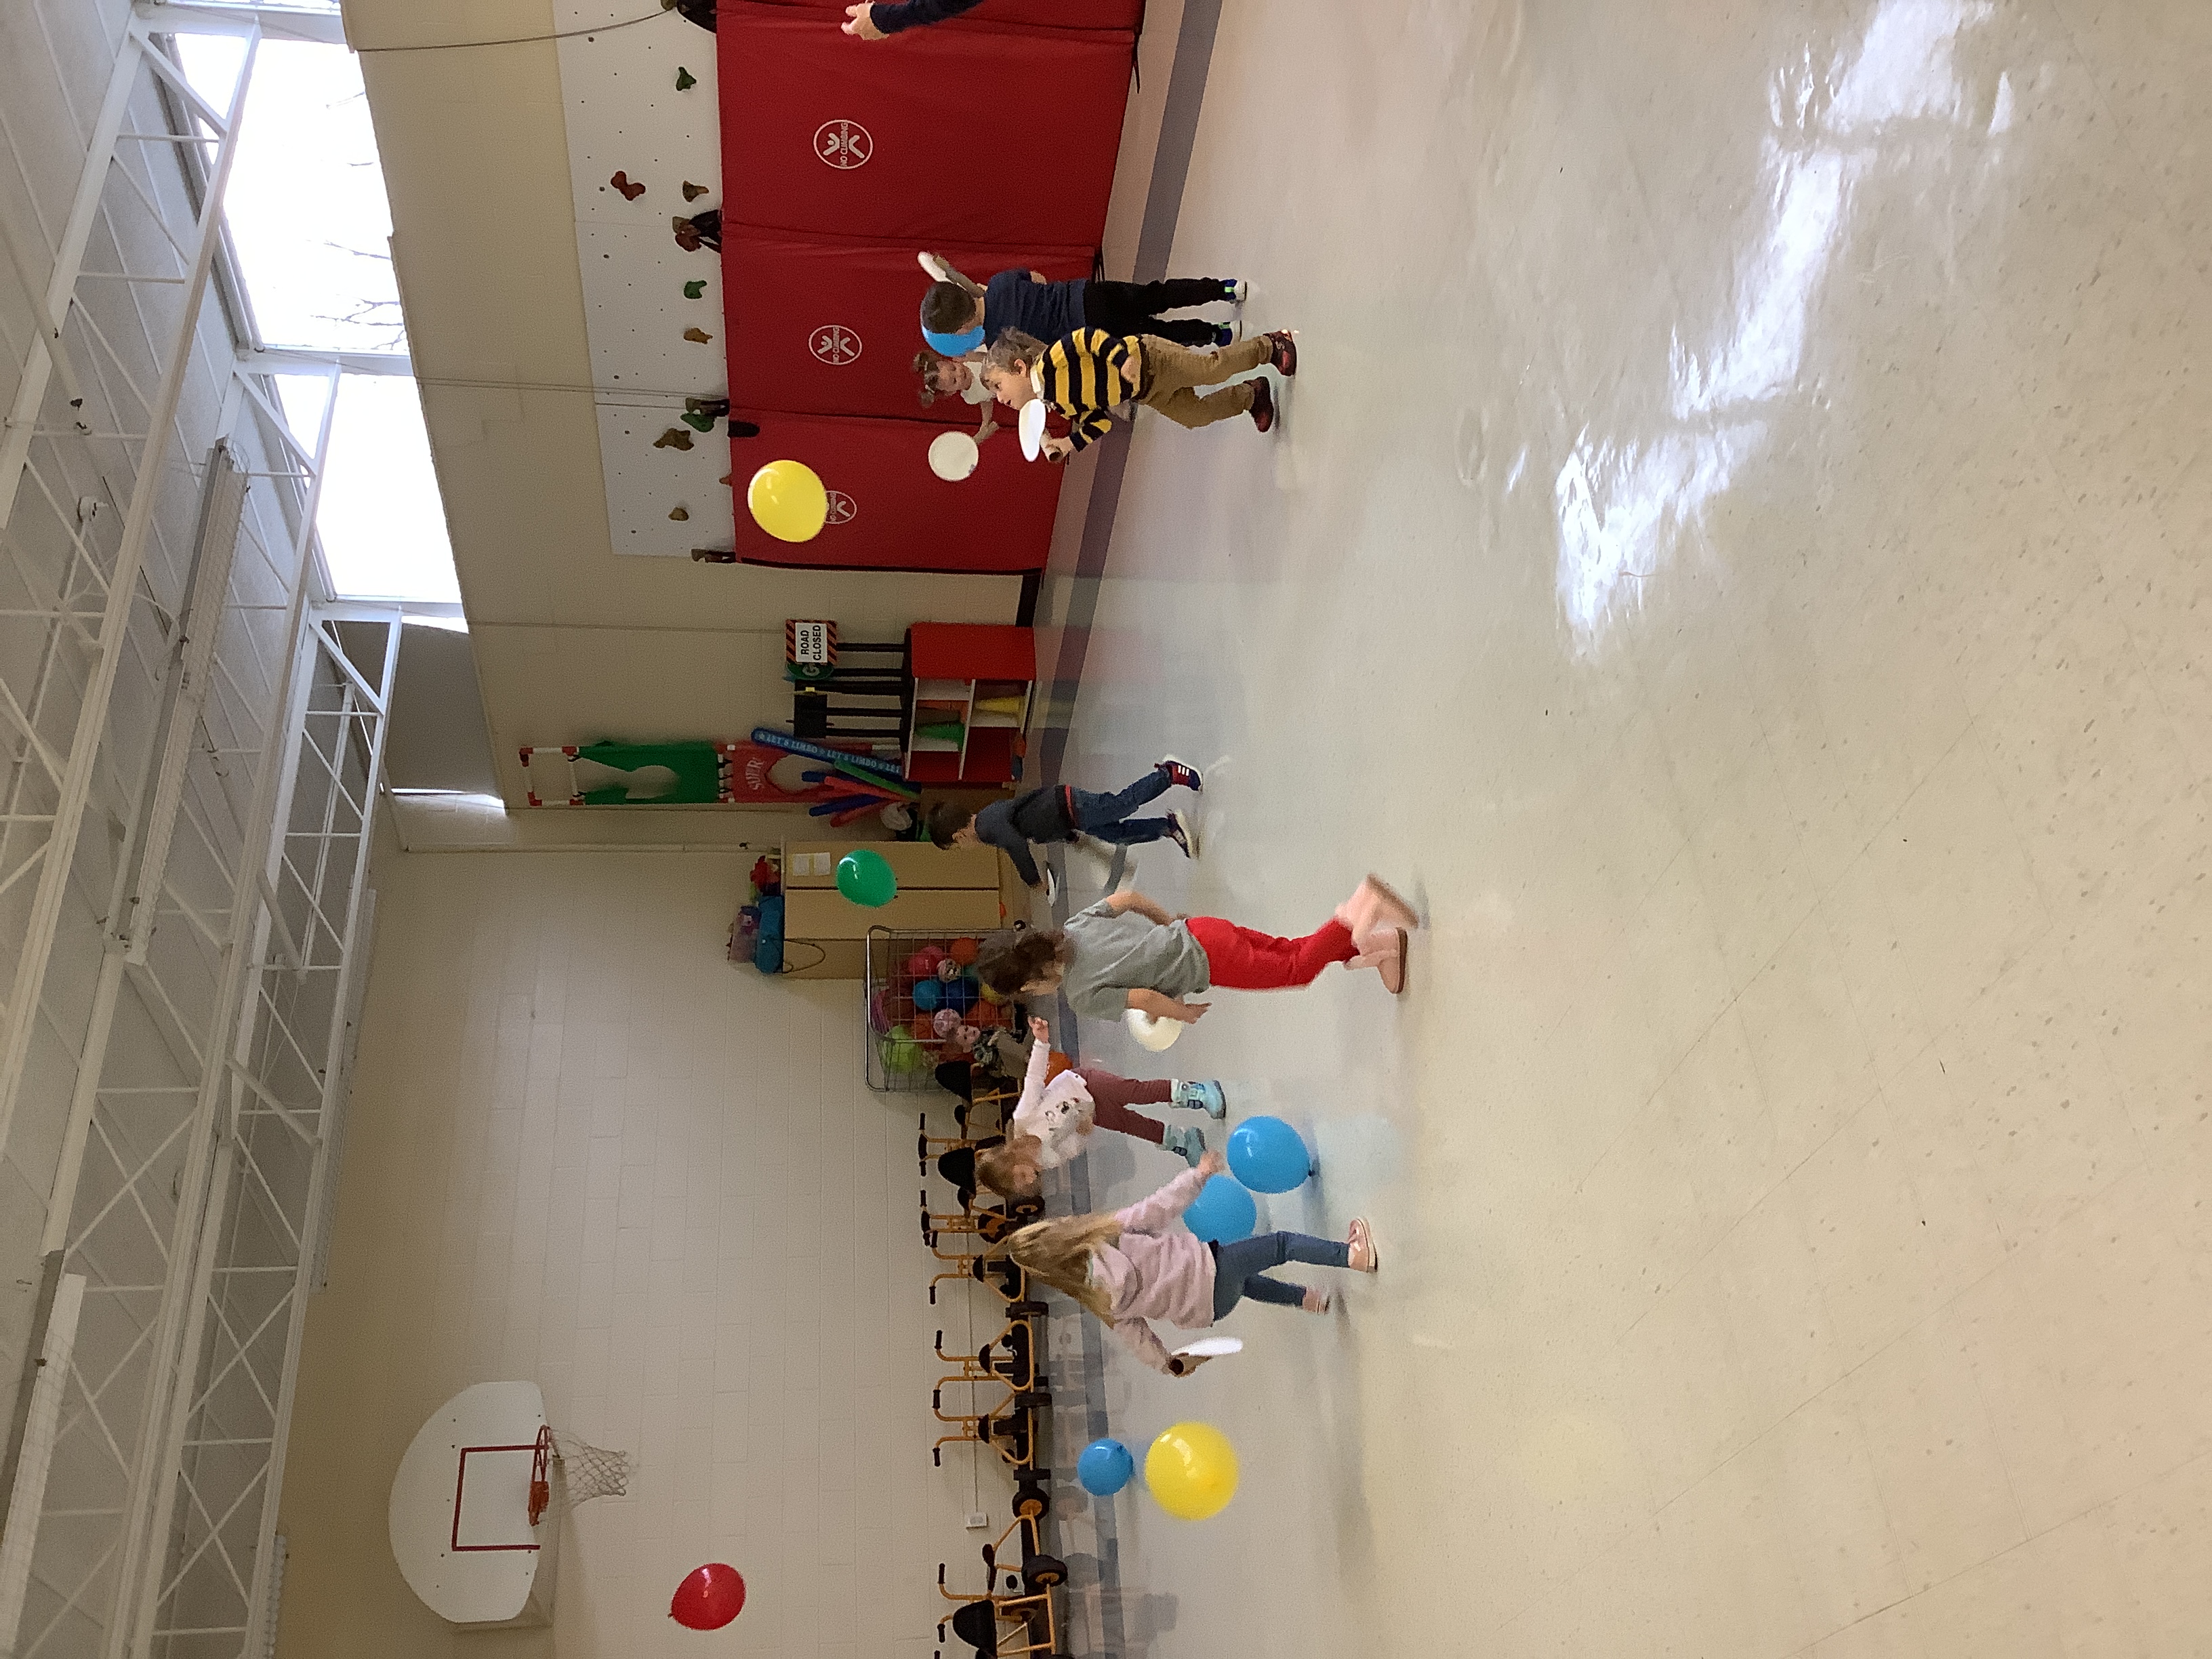 Balloons in the gym